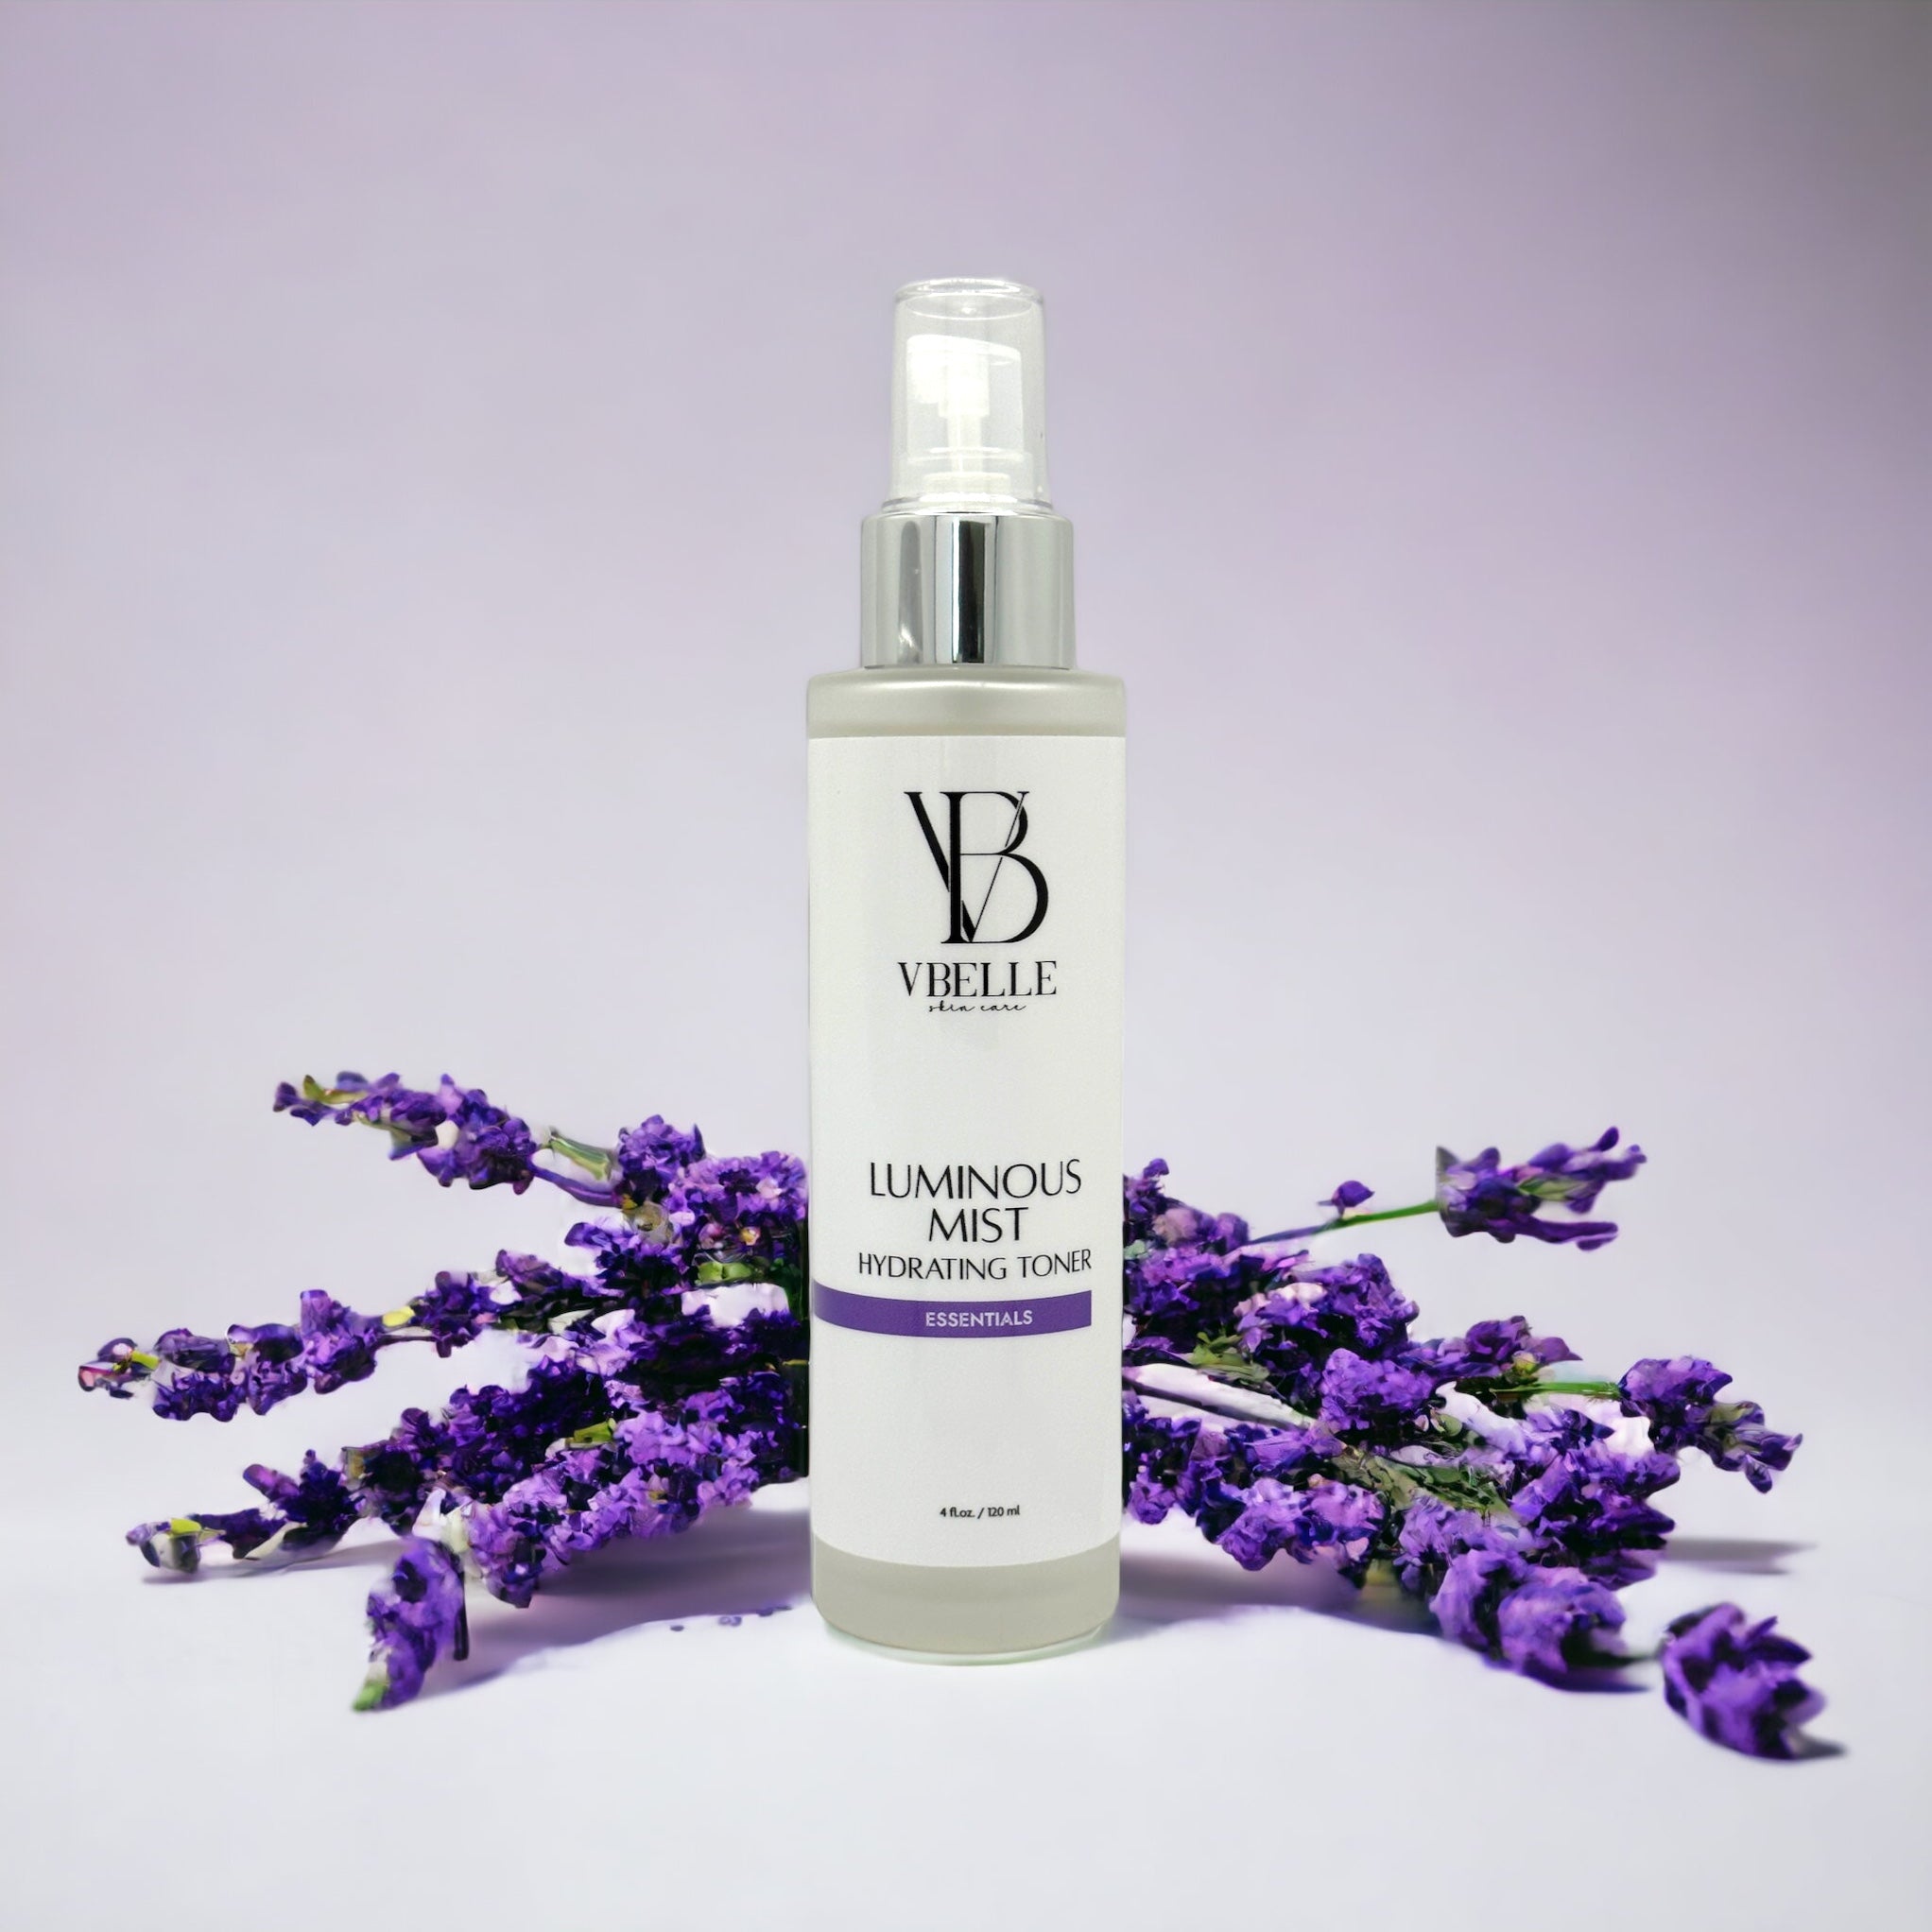 Organic Luminous Mist Hydrating Toner  4 fl oz glass bottle with Lavender flowers in the background and a light violet backdrop